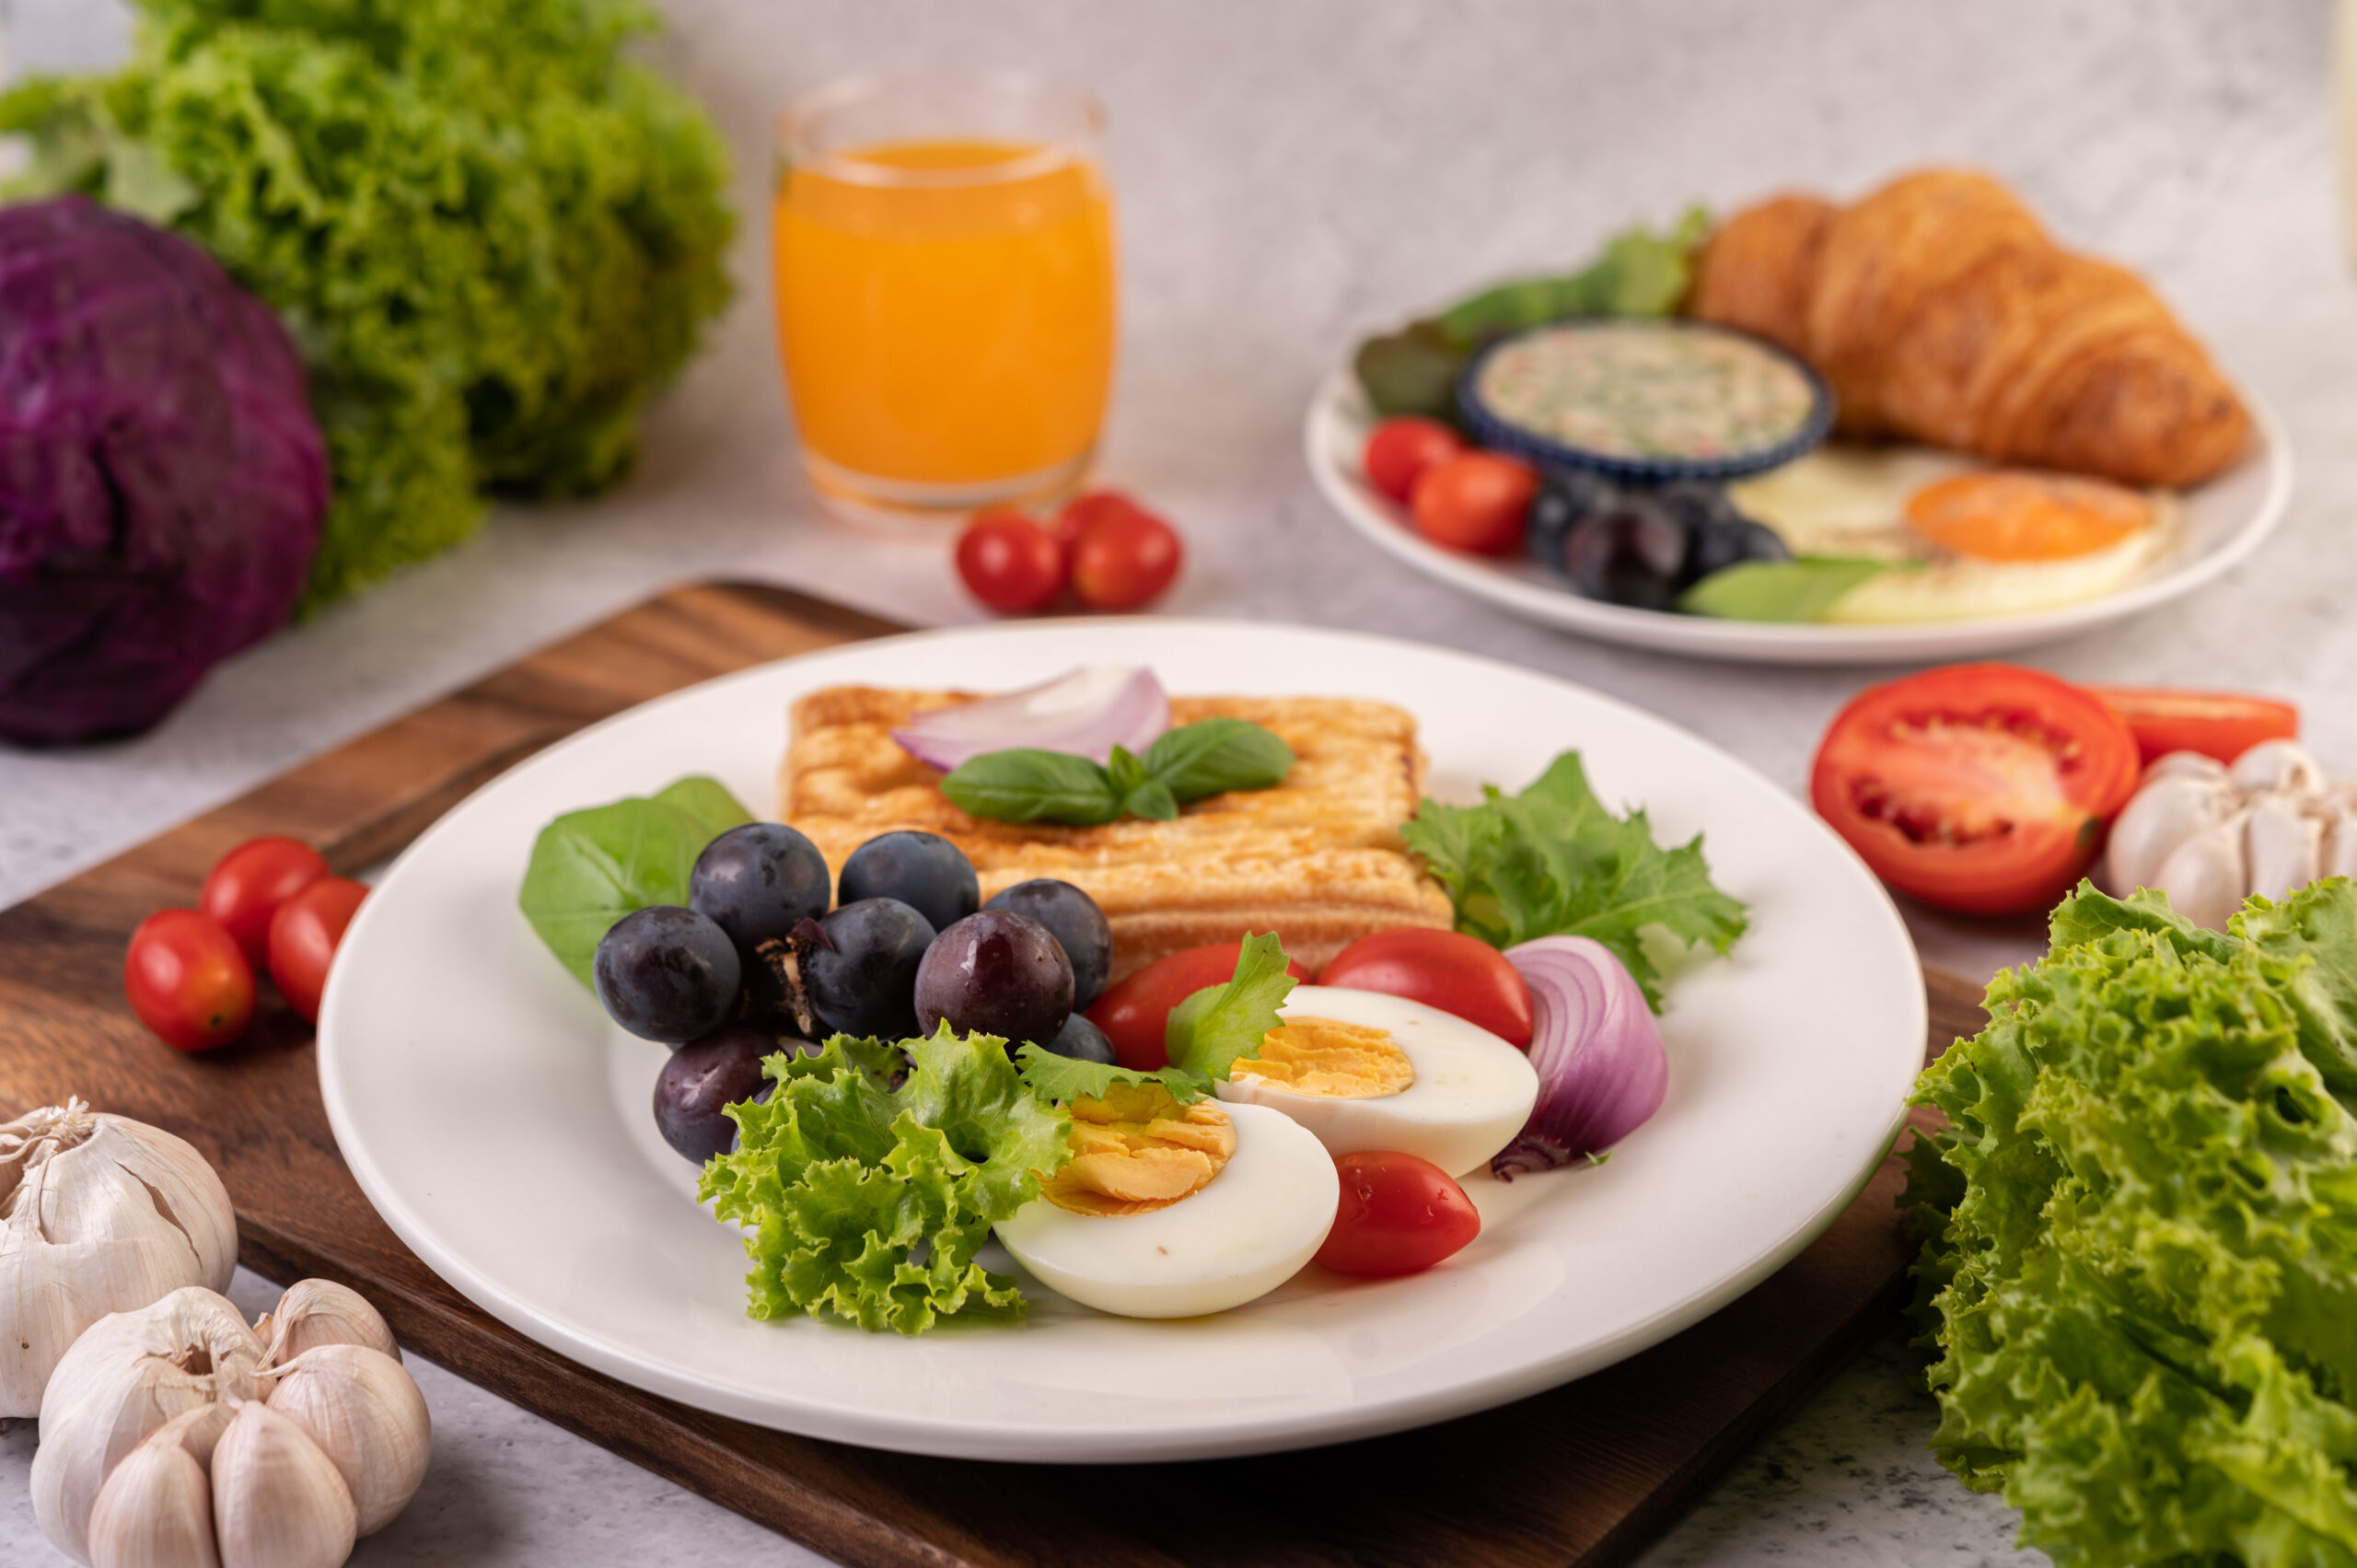  10 Best Breakfast For Diabetes That Helps Balancing Your Blood Sugar